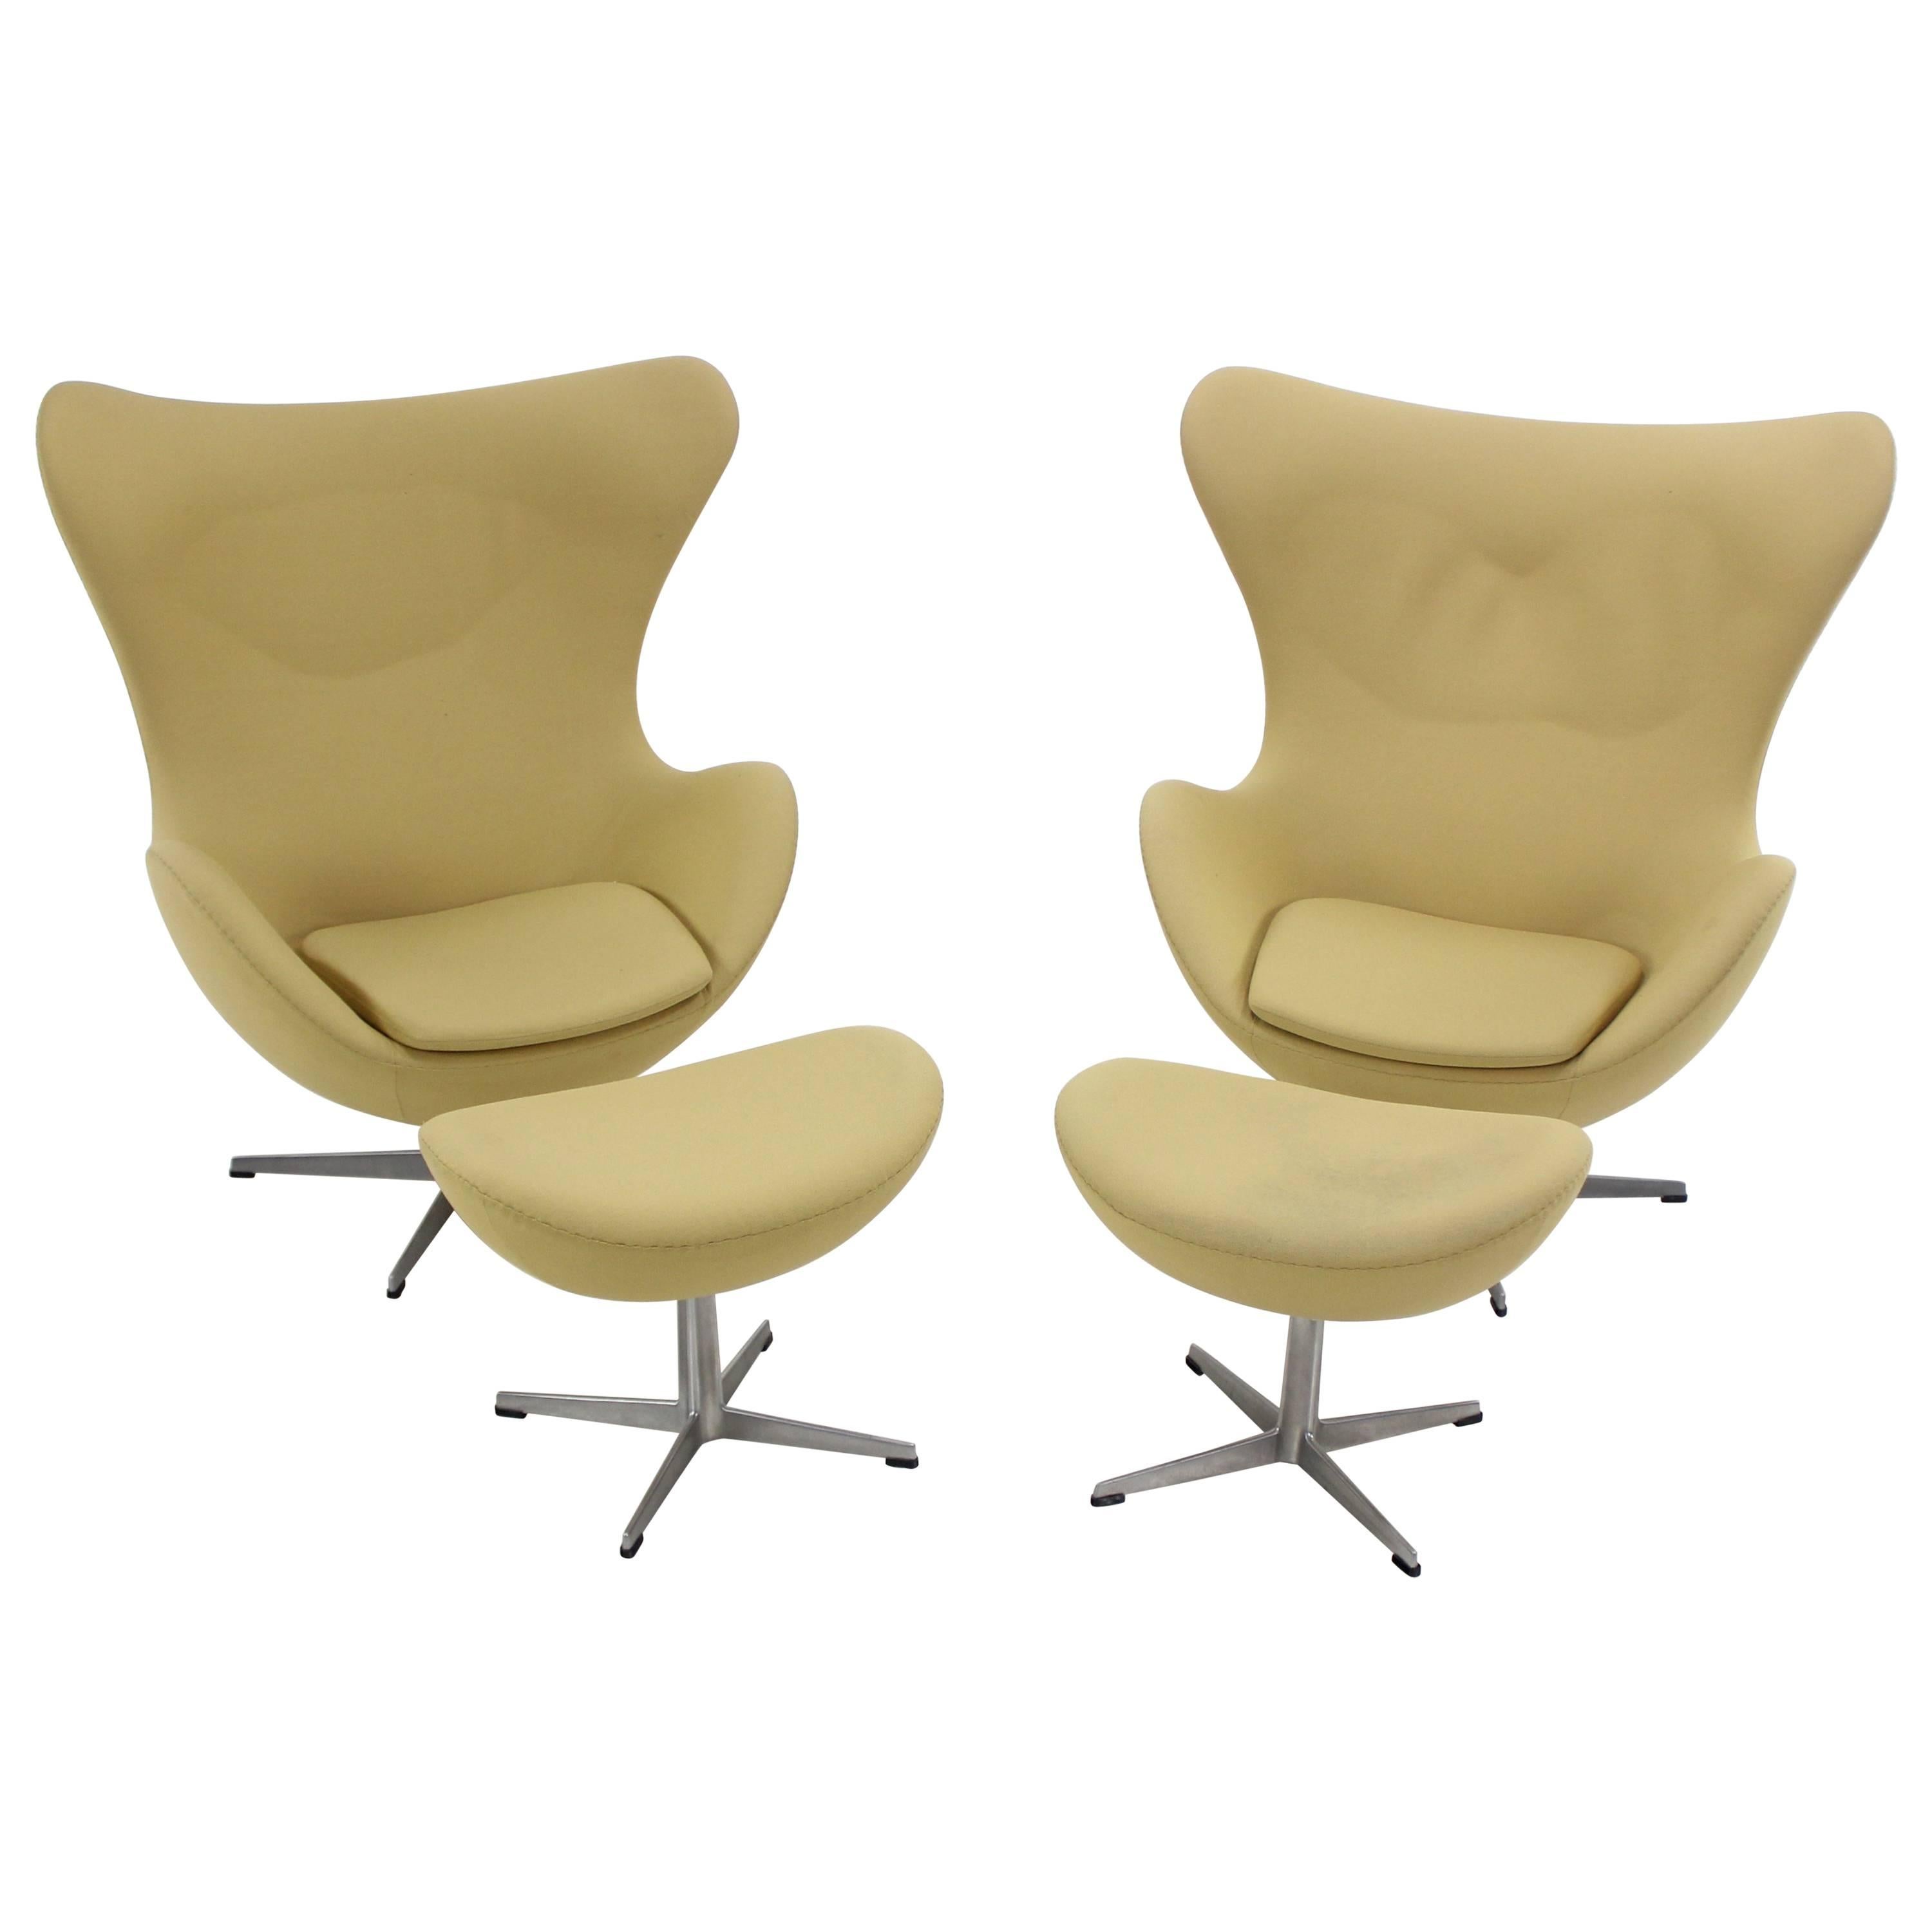 Pair of Danish Modern "Egg" Chairs and Ottomans by Arne Jacobsen For Sale